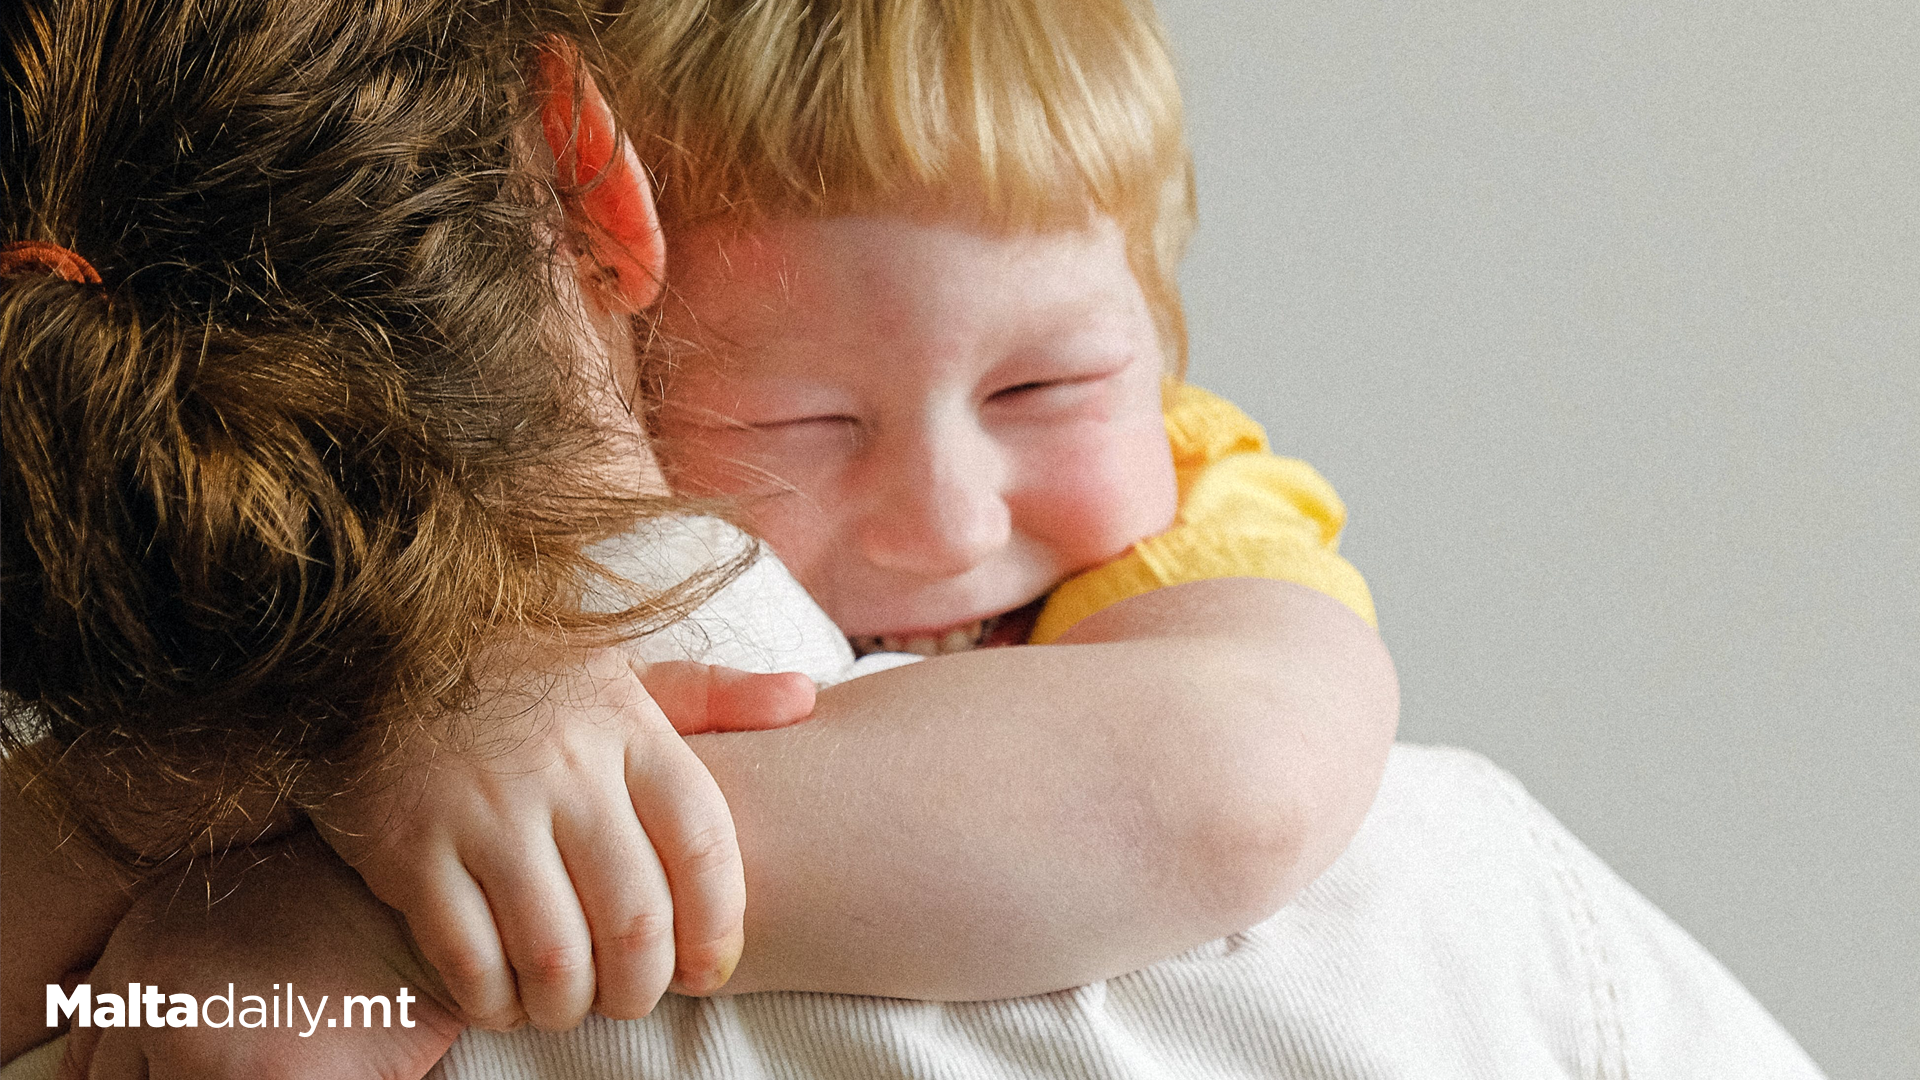 MUm's Call as Powerful as a Hug, Study Finds